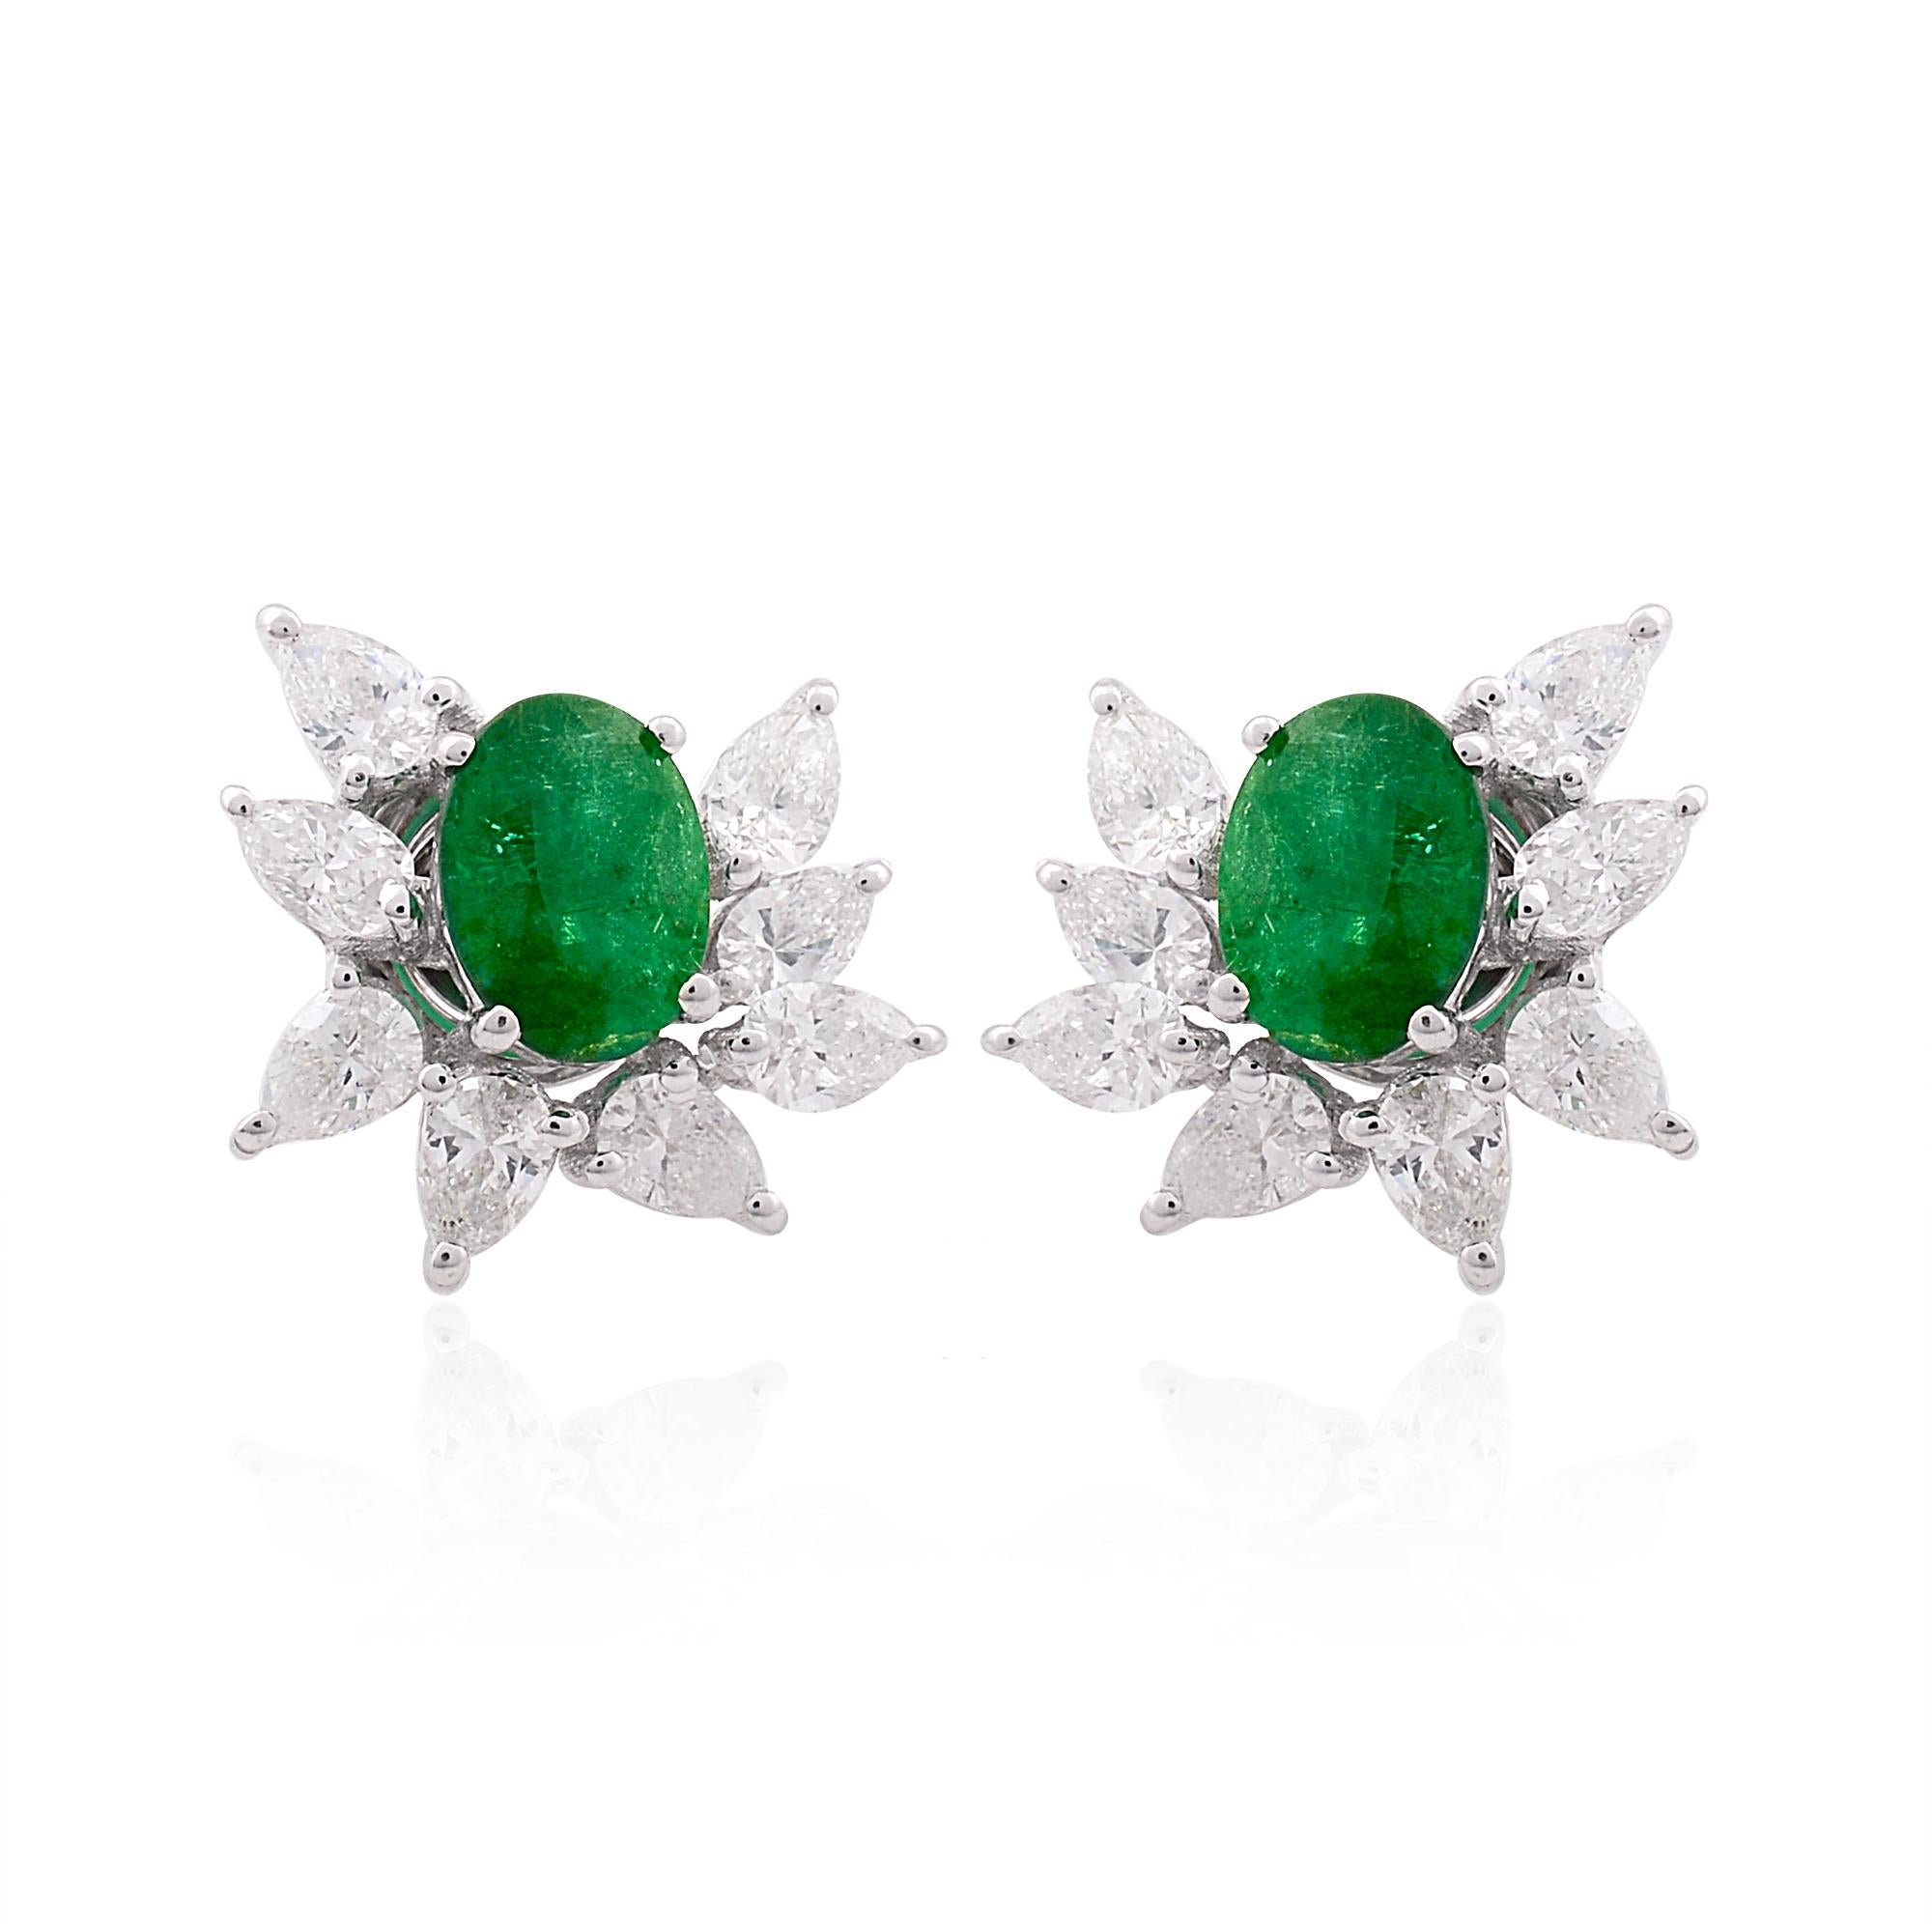 Item Code :- SEE-1470B (14k)
Gross Wet :- 3.37 gm
14k White Gold Wt :- 2.82 gm
Natural Diamond Wt :- 1.35 ct ( AVERAGE DIAMOND CLARITY SI1-SI2 & COLOR H-I )
Zambian Emerald Wt :- 1.38 ct
Earrings Size :- 13x13 mm approx.

✦